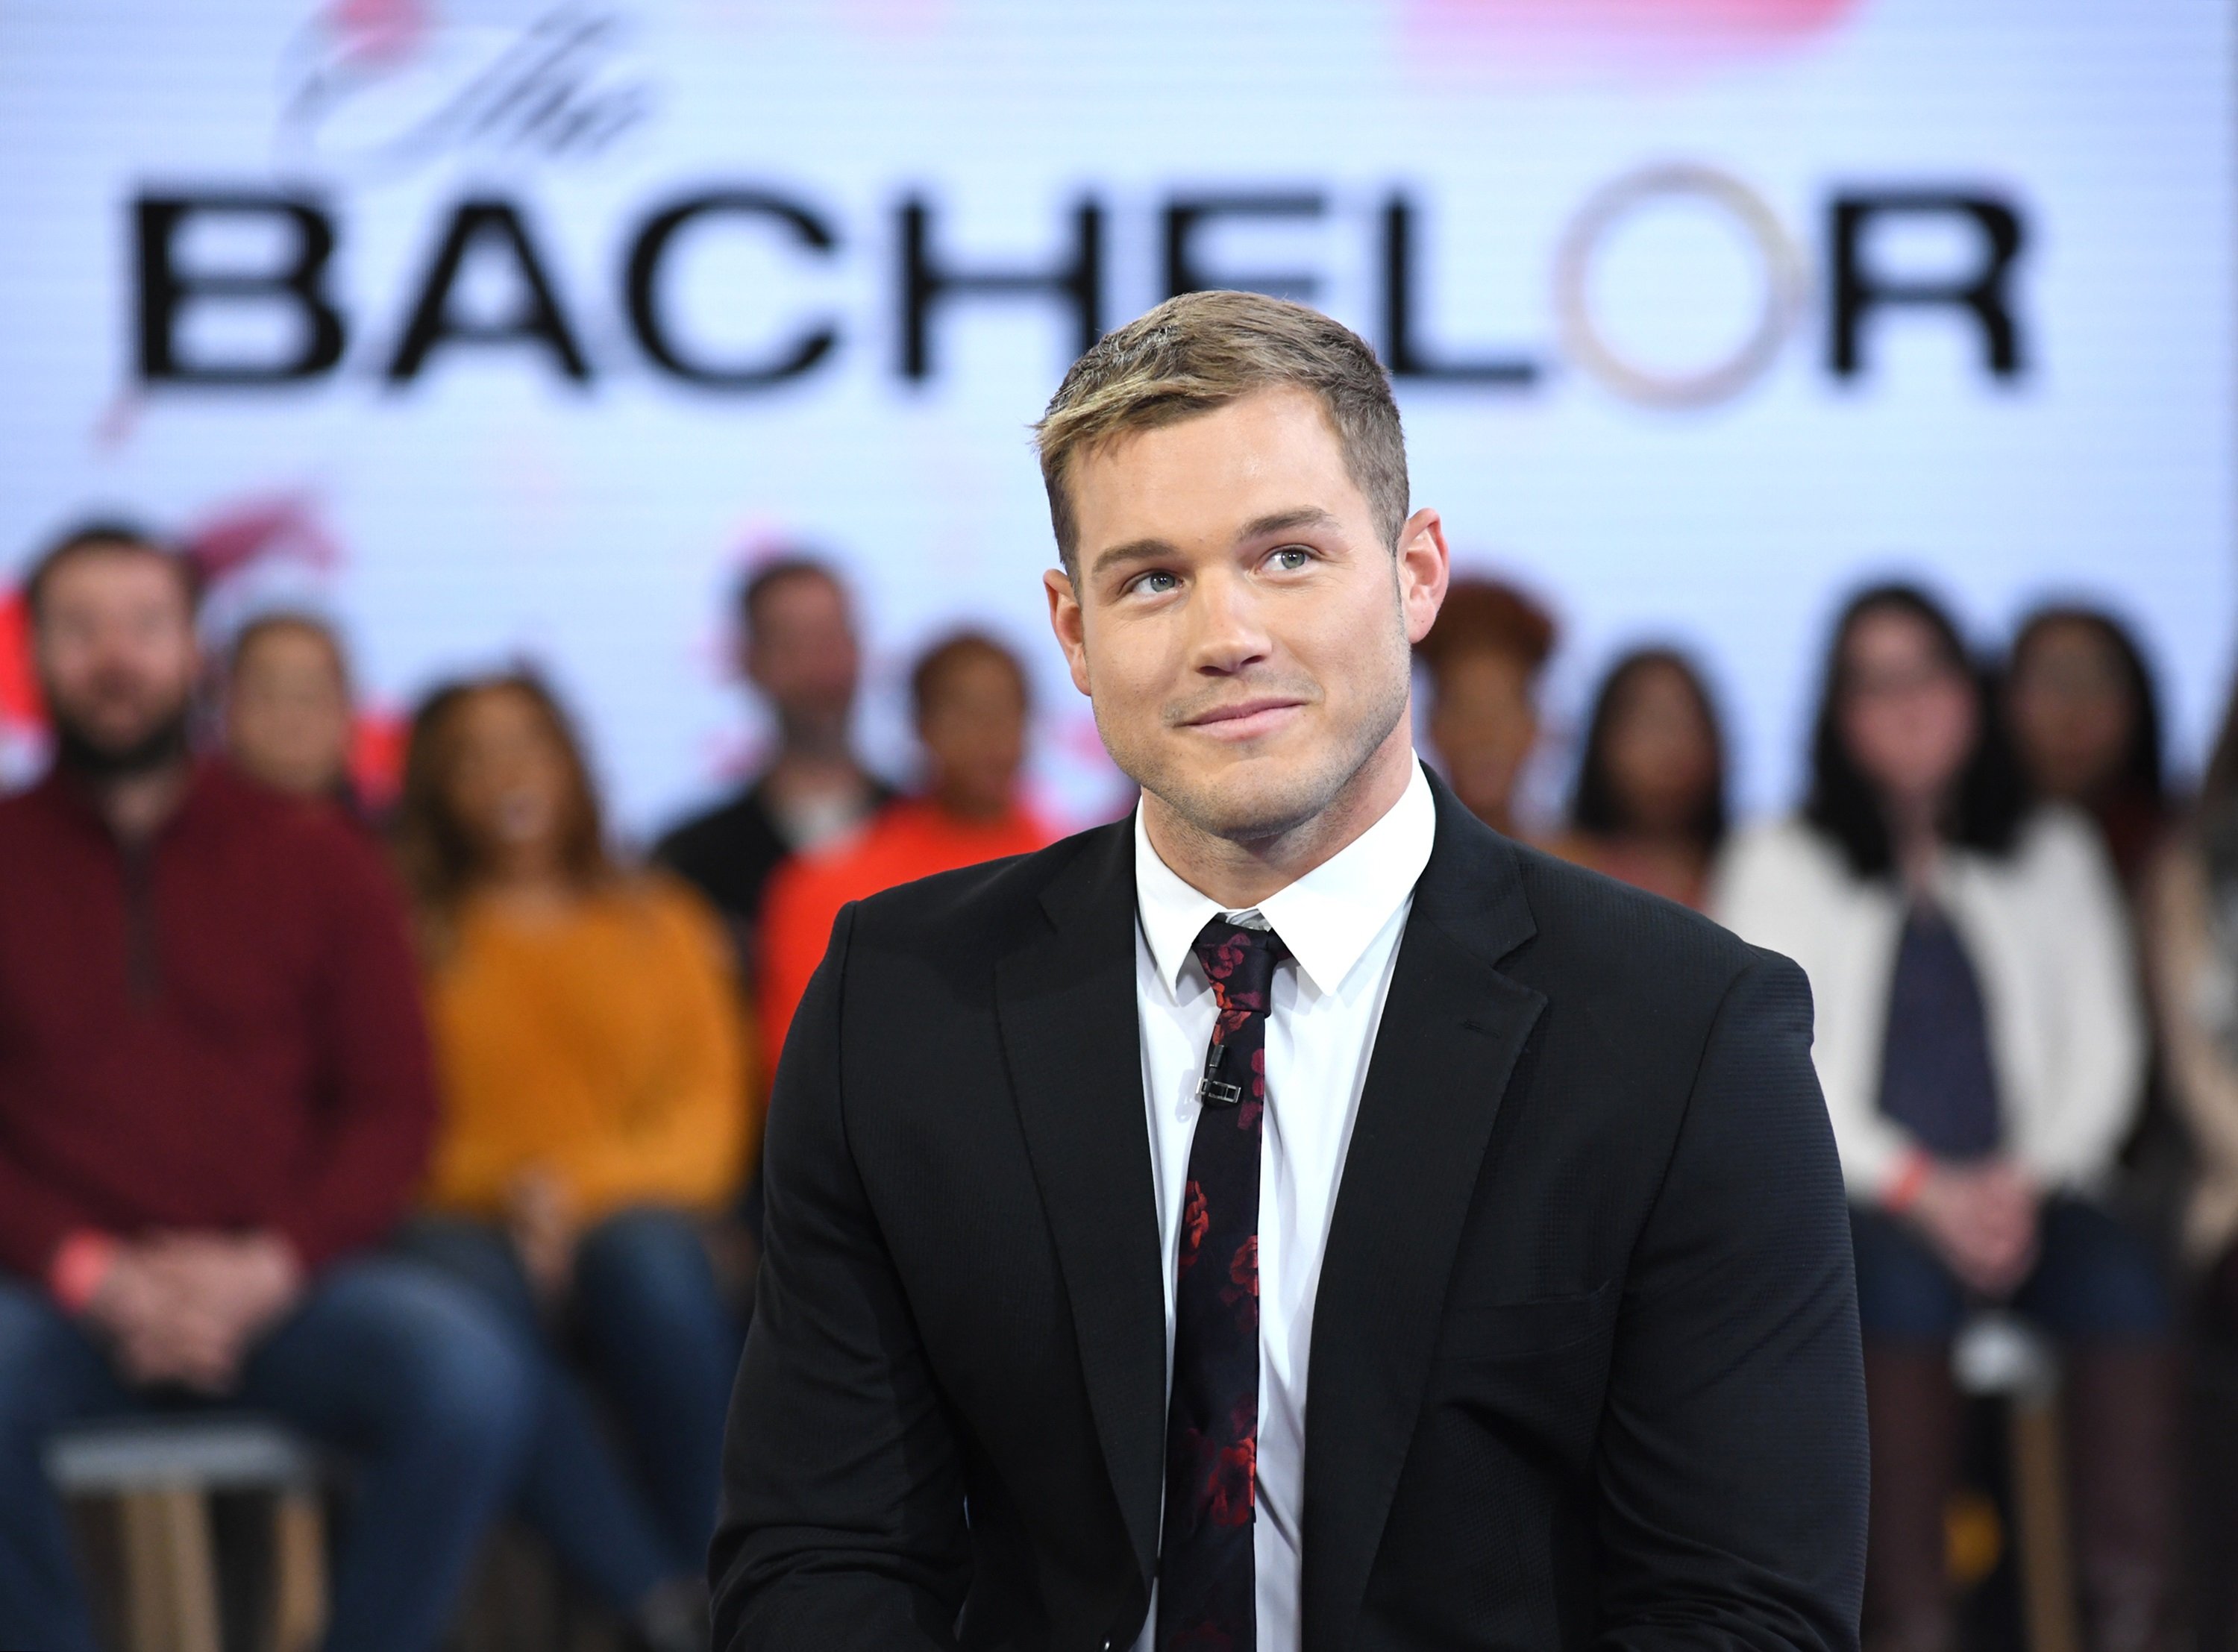 The Bachelor Colton Underwood came out as gay on Good Morning America